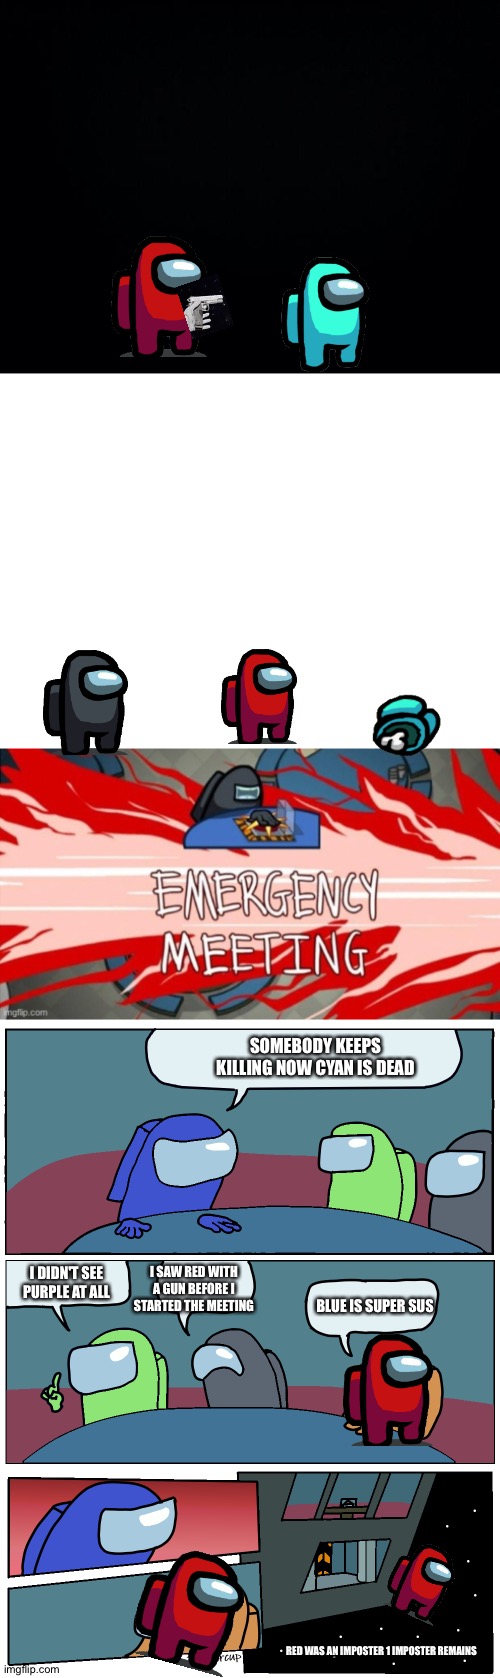 SOMEBODY KEEPS KILLING NOW CYAN IS DEAD; I DIDN'T SEE PURPLE AT ALL; I SAW RED WITH A GUN BEFORE I STARTED THE MEETING; BLUE IS SUPER SUS; RED WAS AN IMPOSTER 1 IMPOSTER REMAINS | image tagged in black background,blank white template,among us meeting,emergency meeting among us black crew mate | made w/ Imgflip meme maker